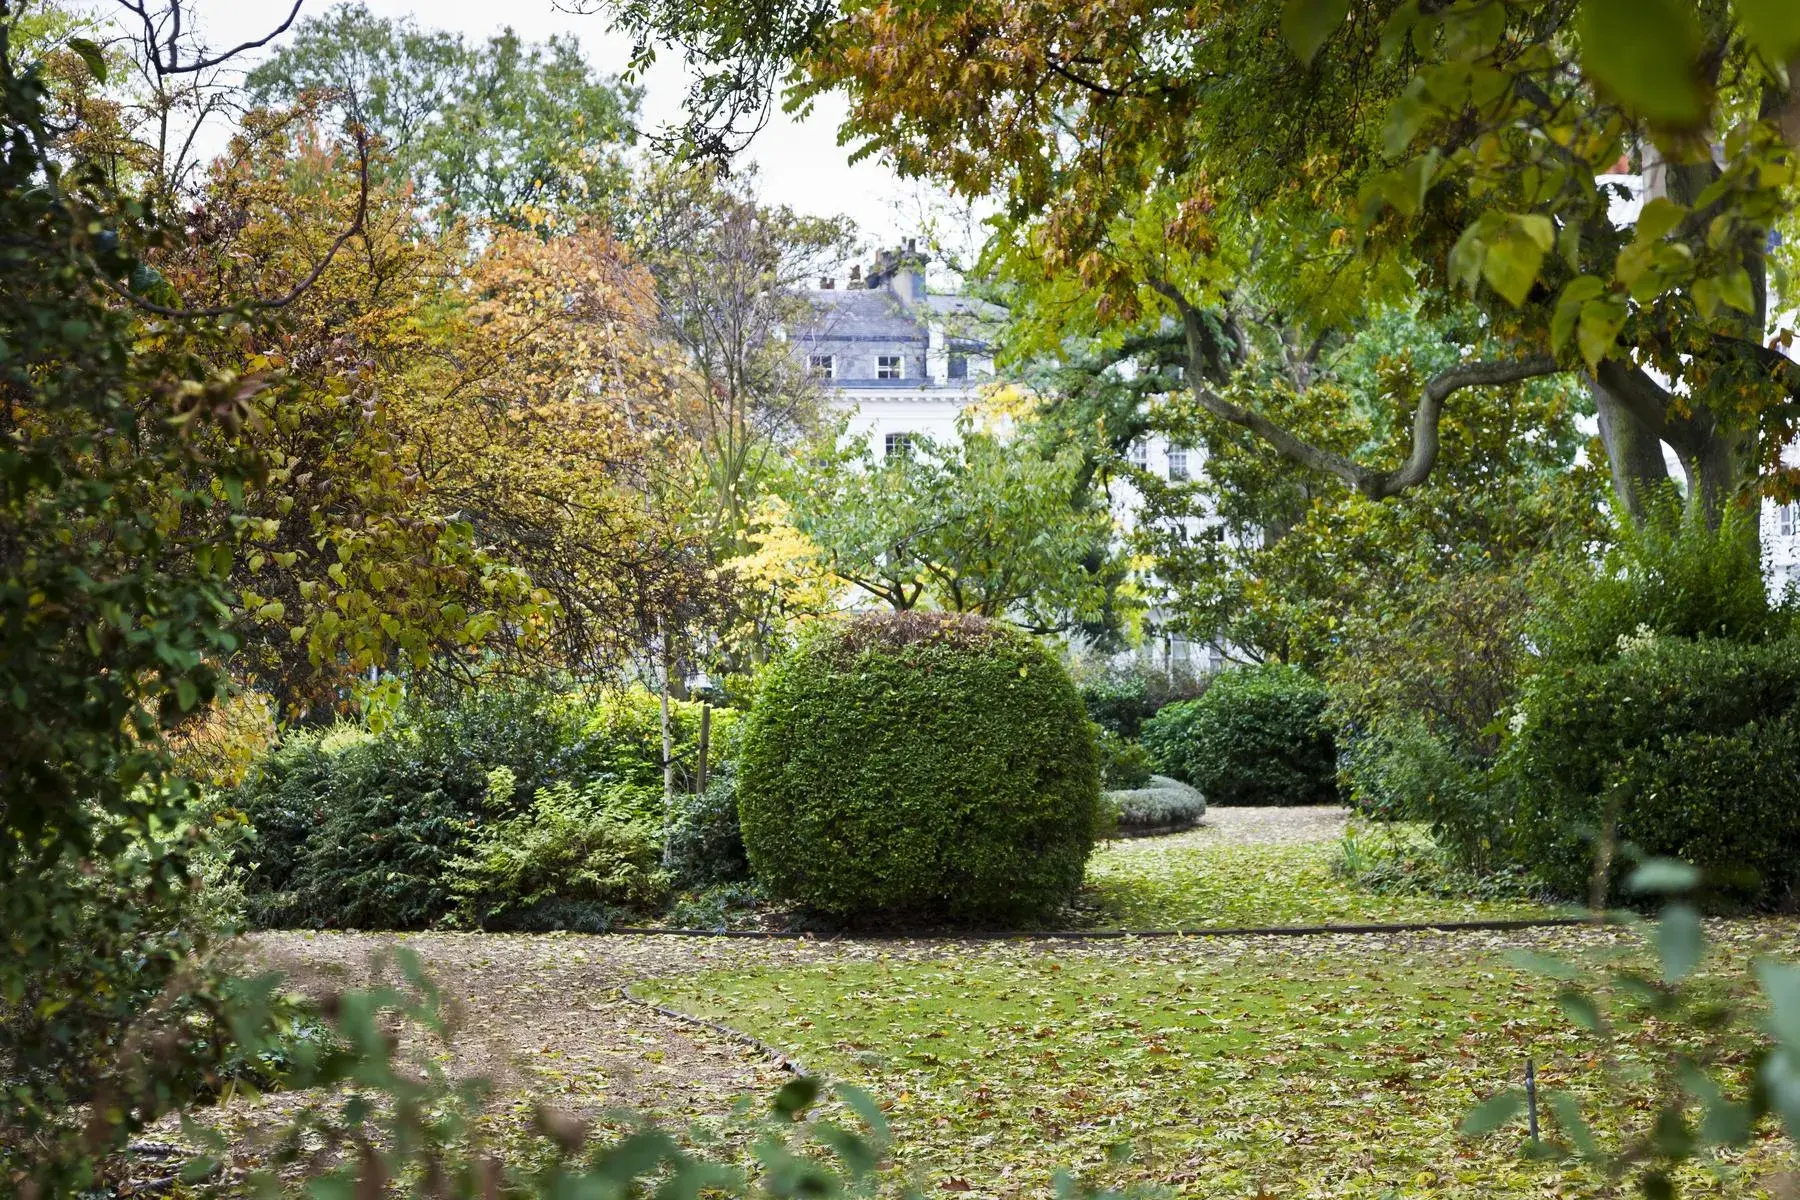 Gledhow Gardens, holiday home in South Kensington, London